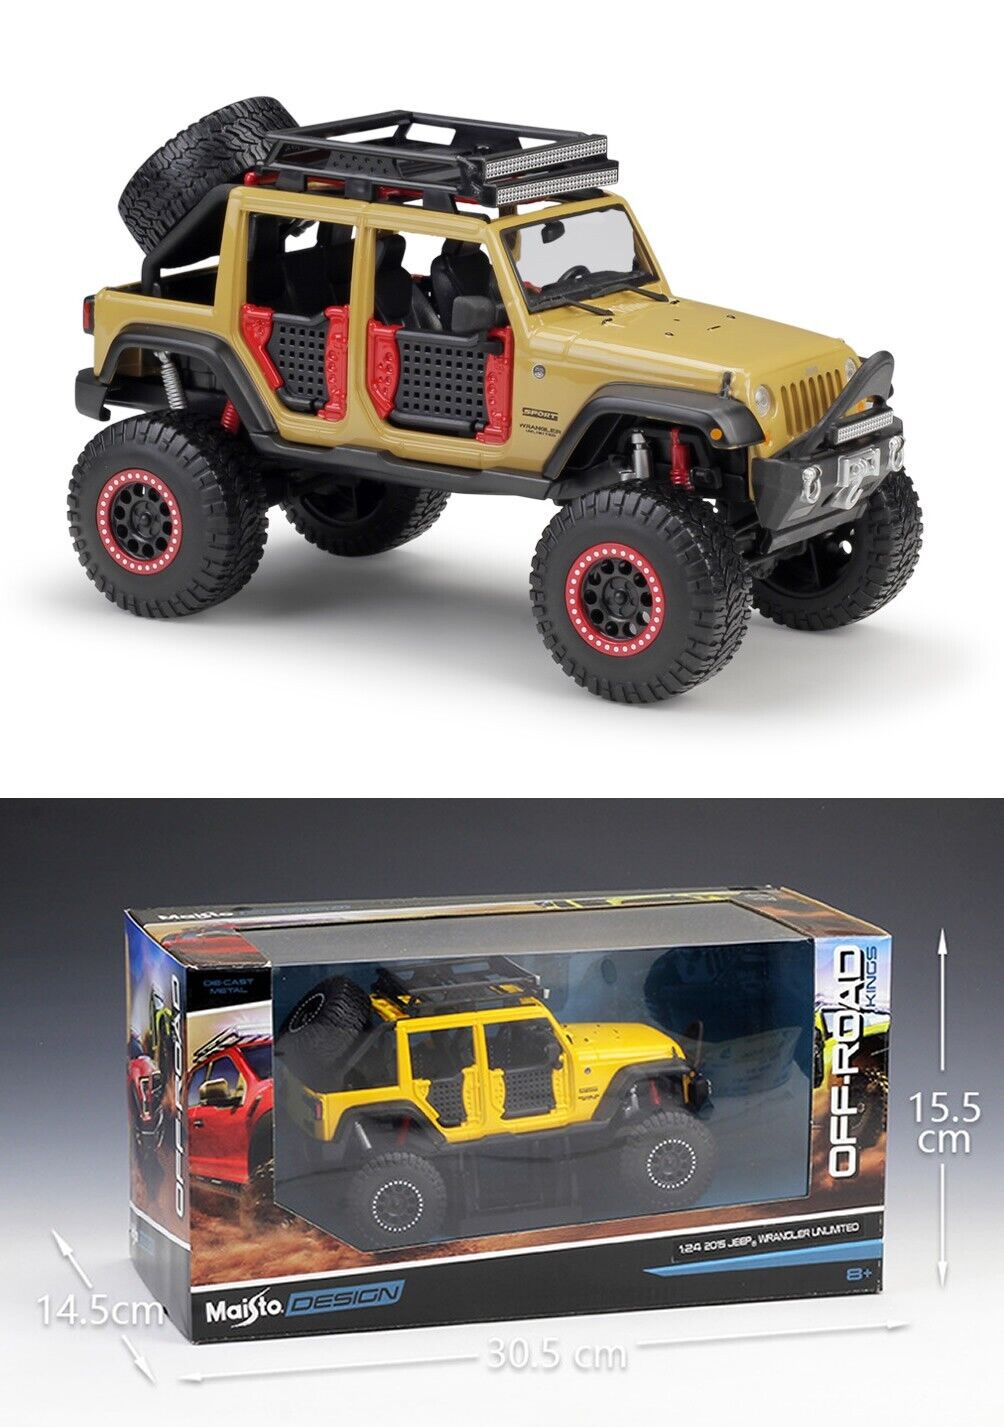 MAISTO 1:24 WRANGLER Unlimitedr Alloy Diecast Vehicle Car MODEL TOY Gift Collect